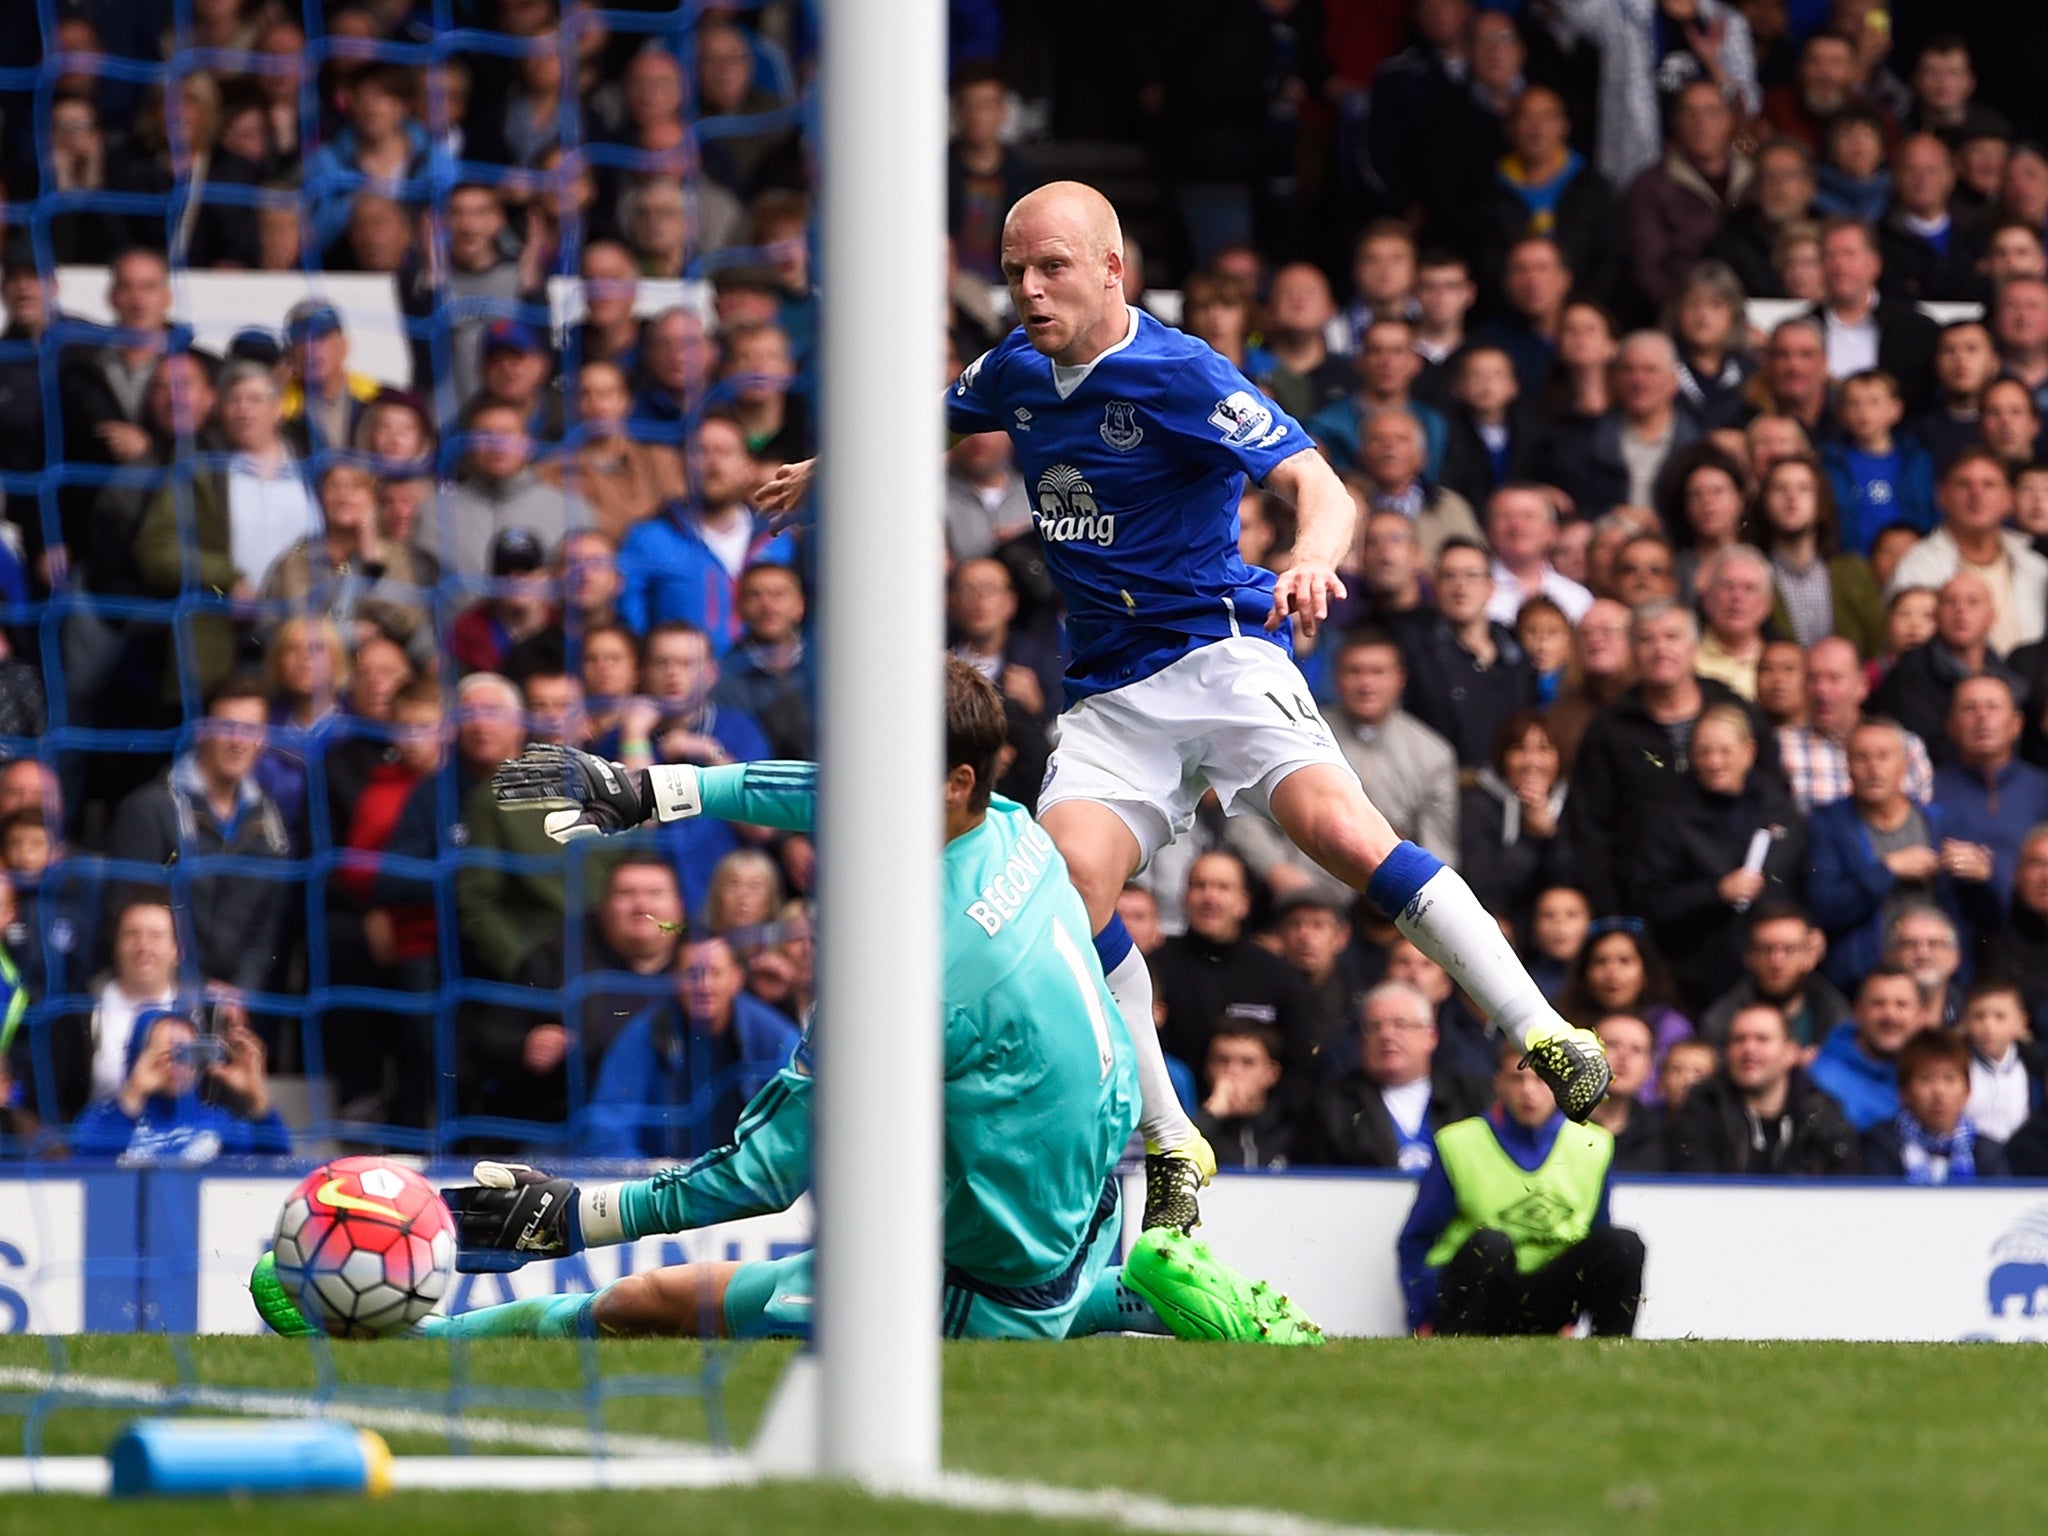 After some great build-up play, Naismith was on hand to score his hat-trick and secure the points